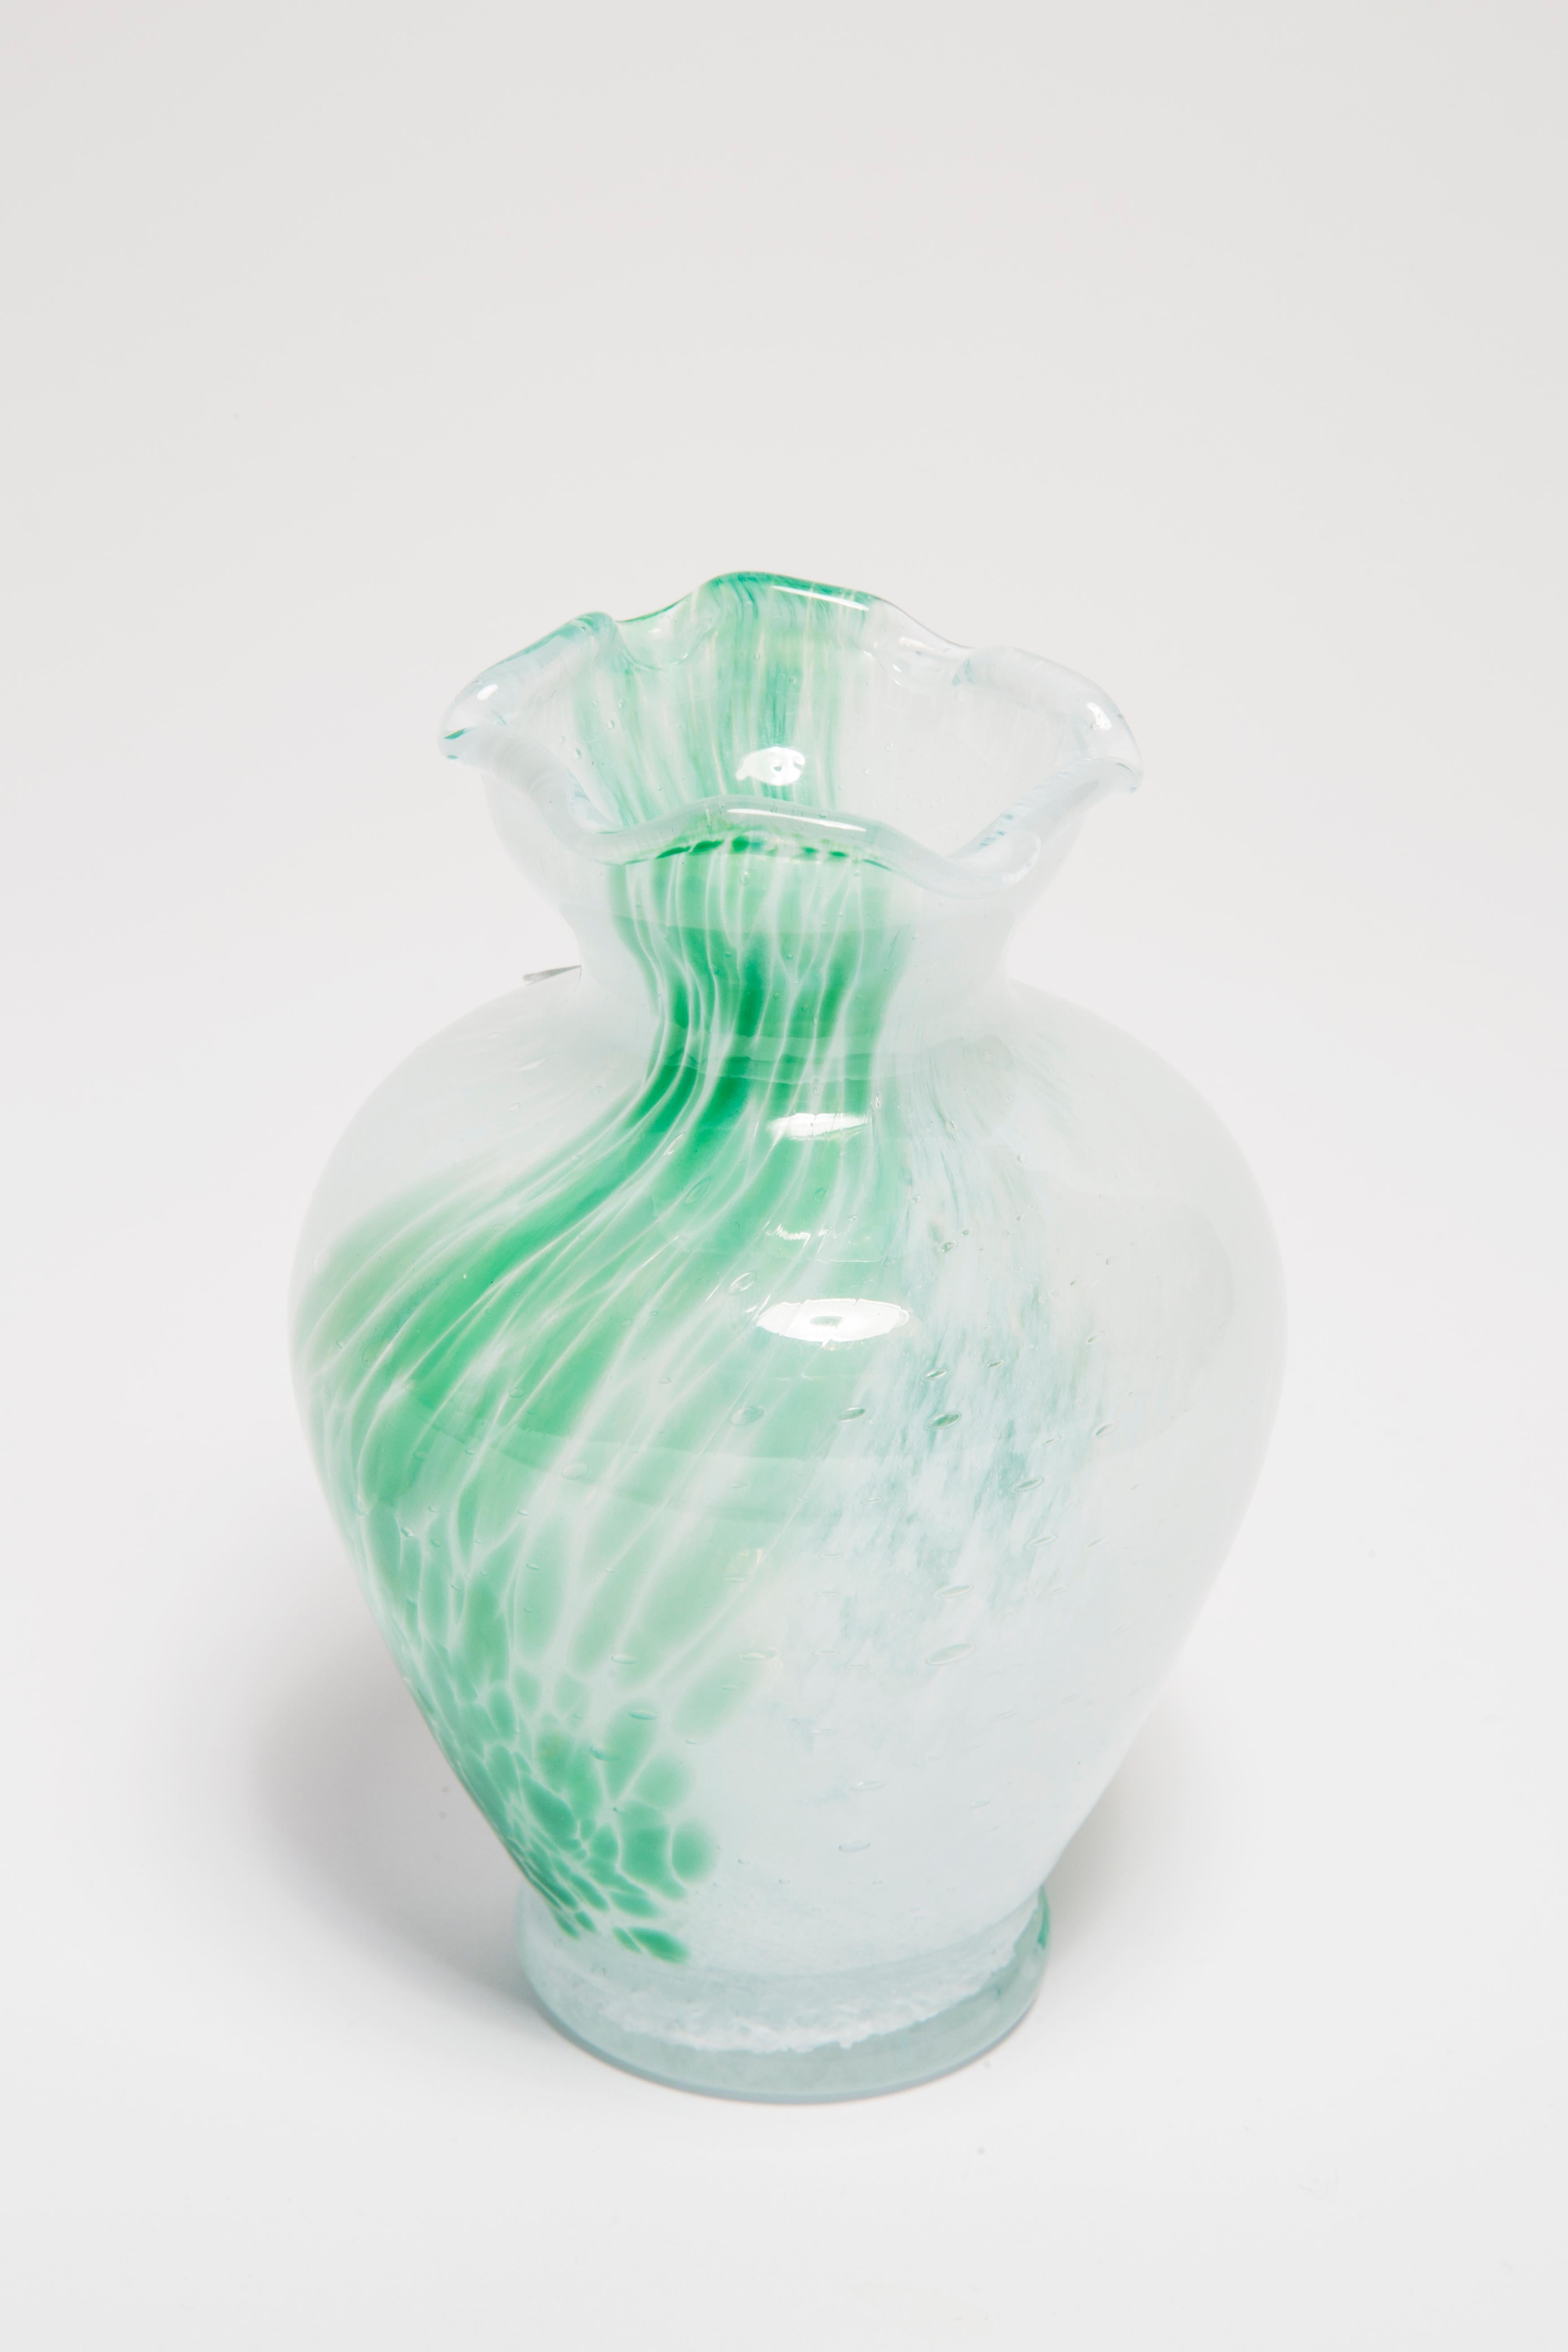 Glass Mid Century Vintage White and Green Small Murano Vase, Italy, 1960s For Sale